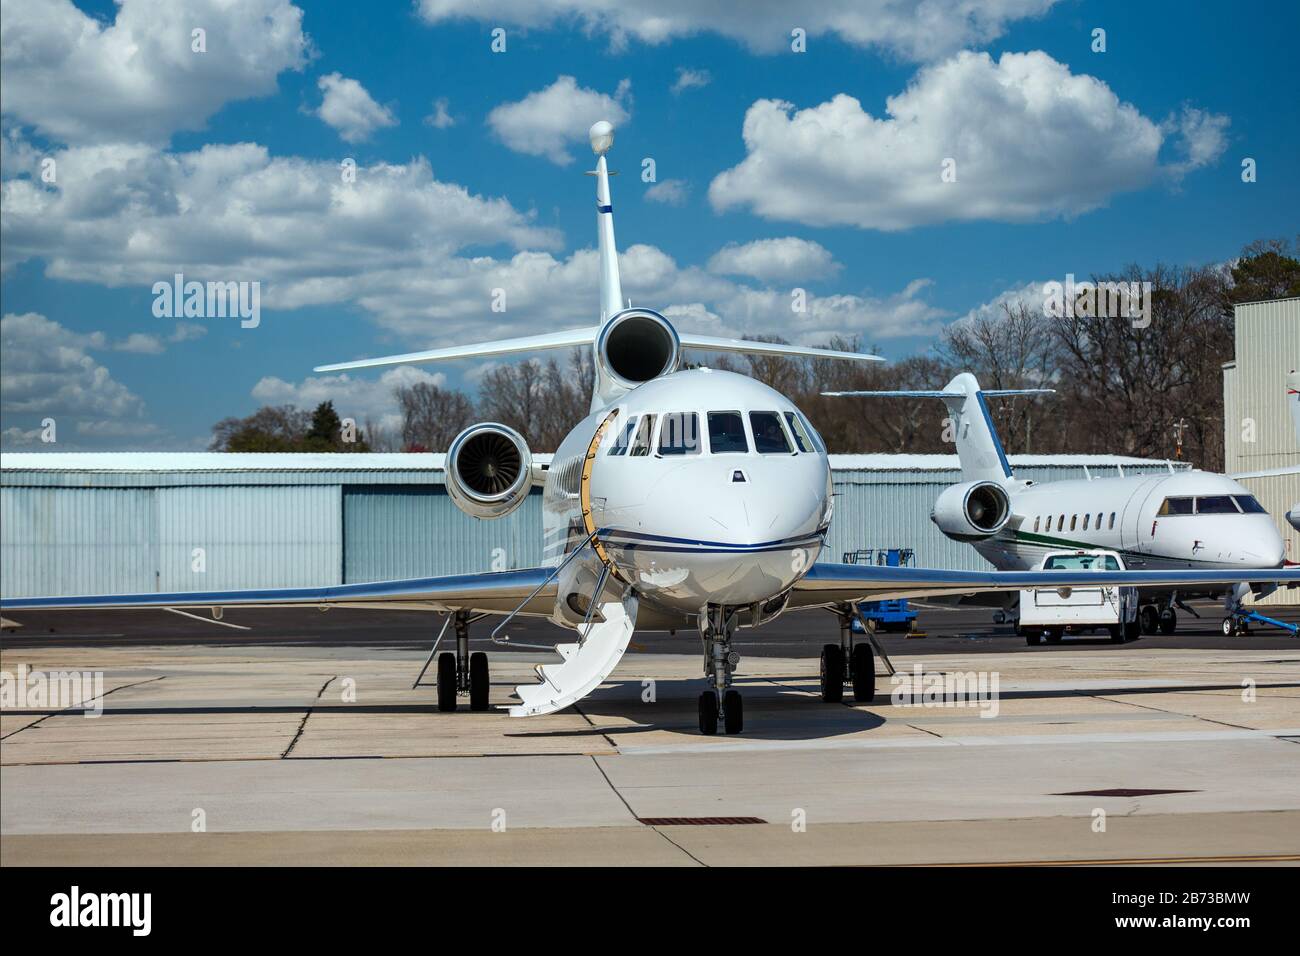 Private Jets by Hangers Stock Photo